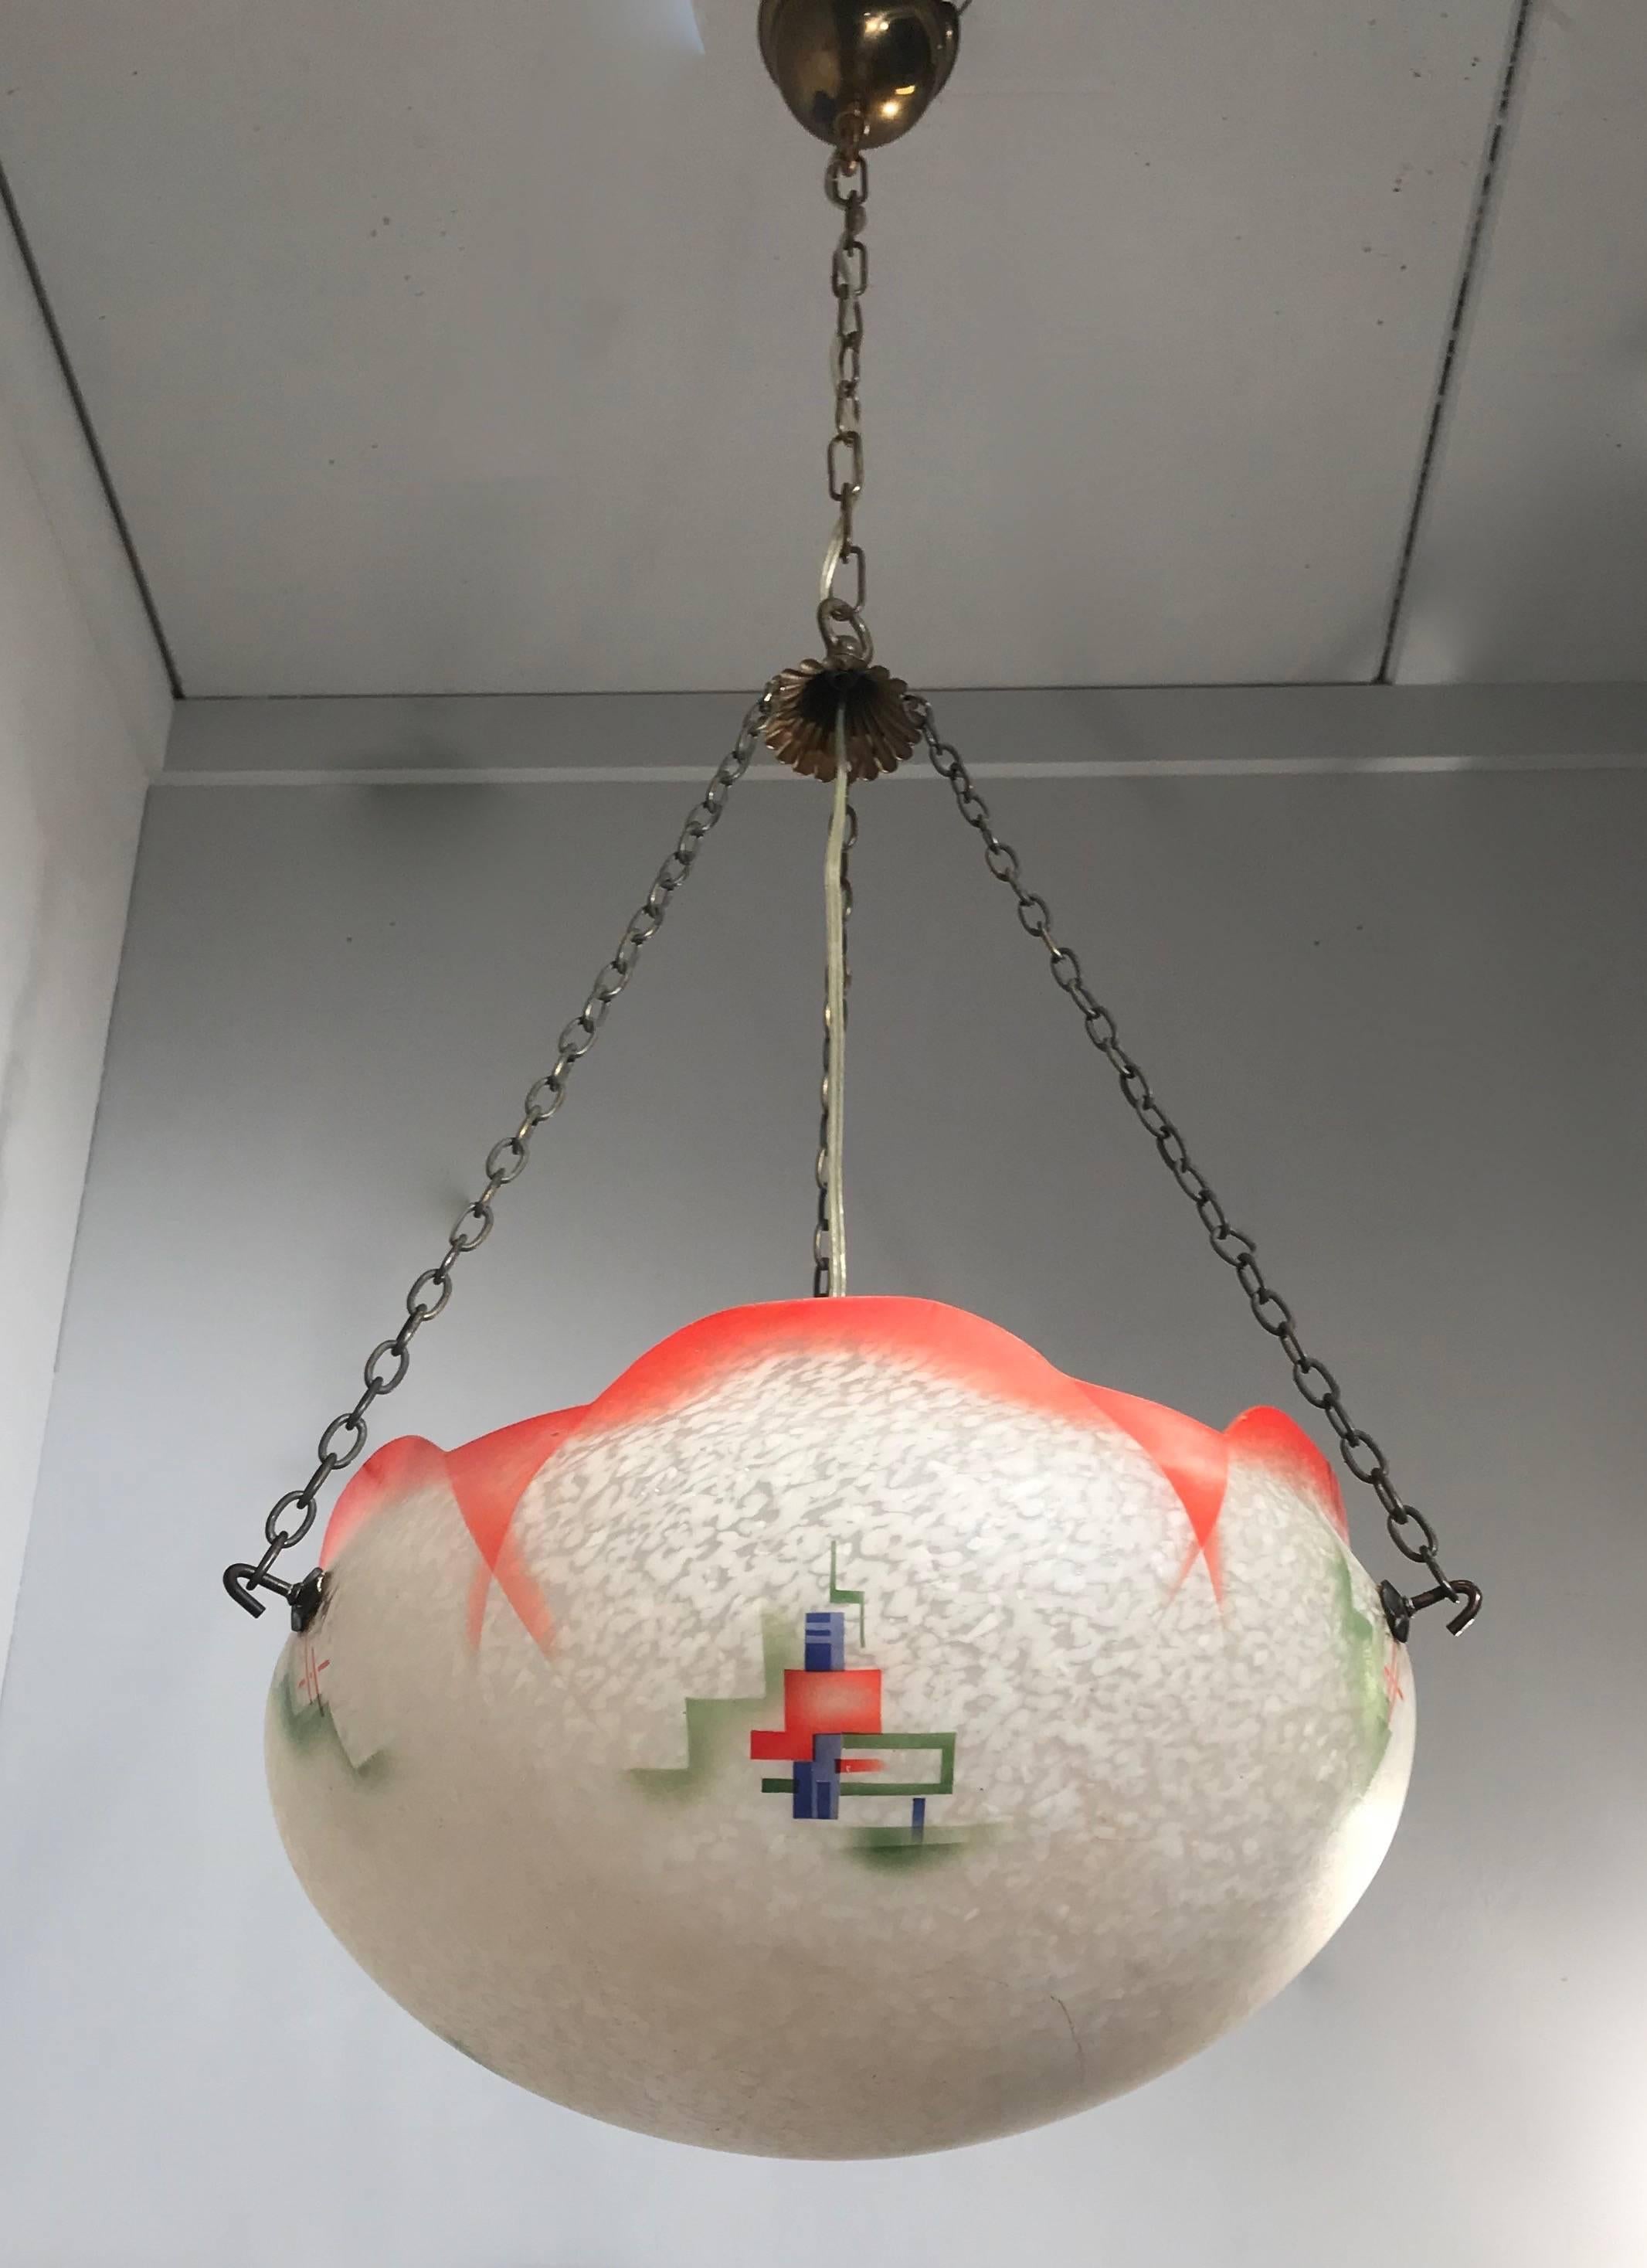 20th Century Great Shape, Size and Color, 1920s Art Deco Glass Pendant Ceiling Lamp